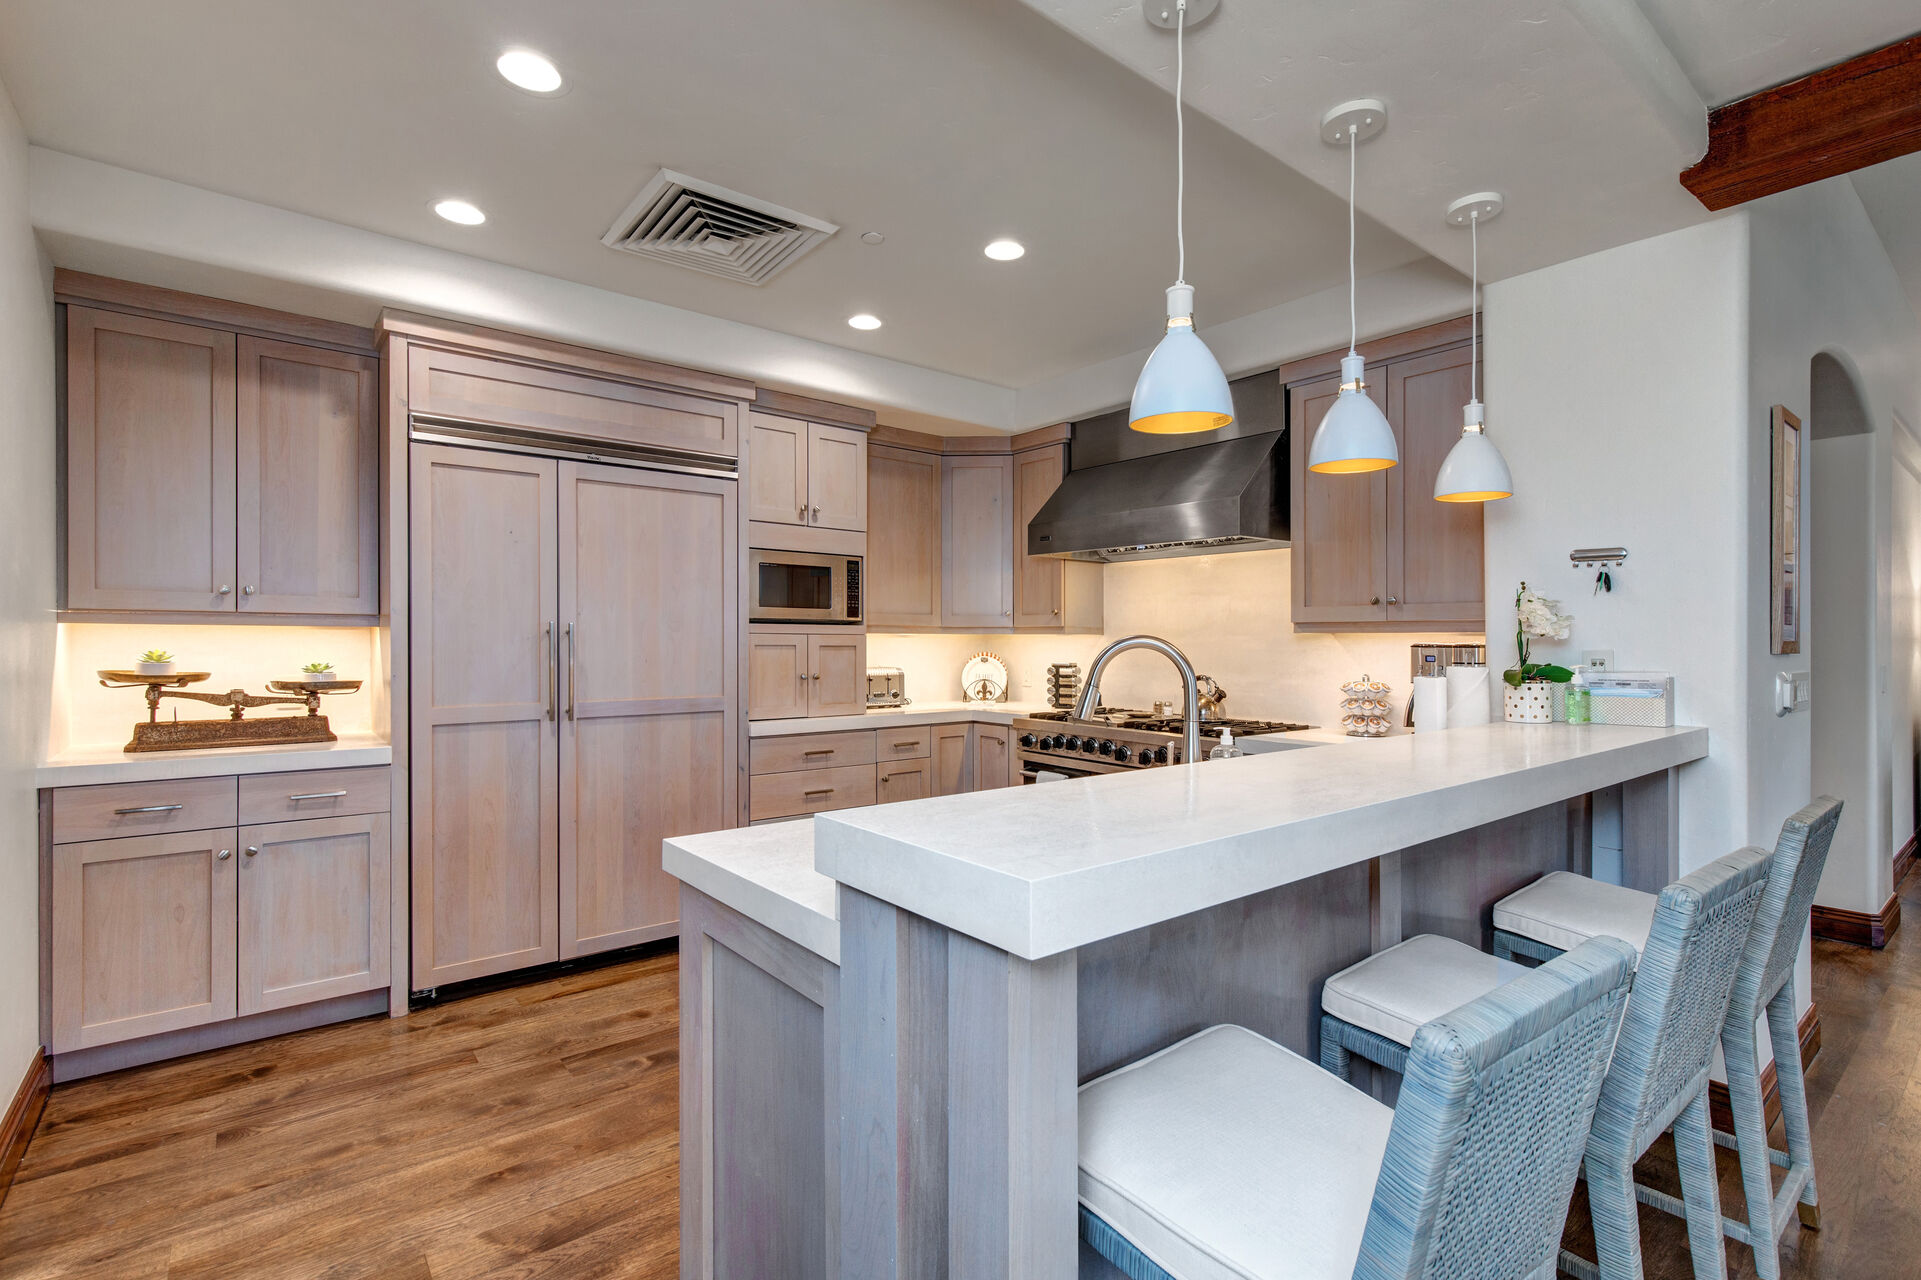 Gourmet Kitchen with High-end Appliances, Stone Counters and Bar Seating for Three